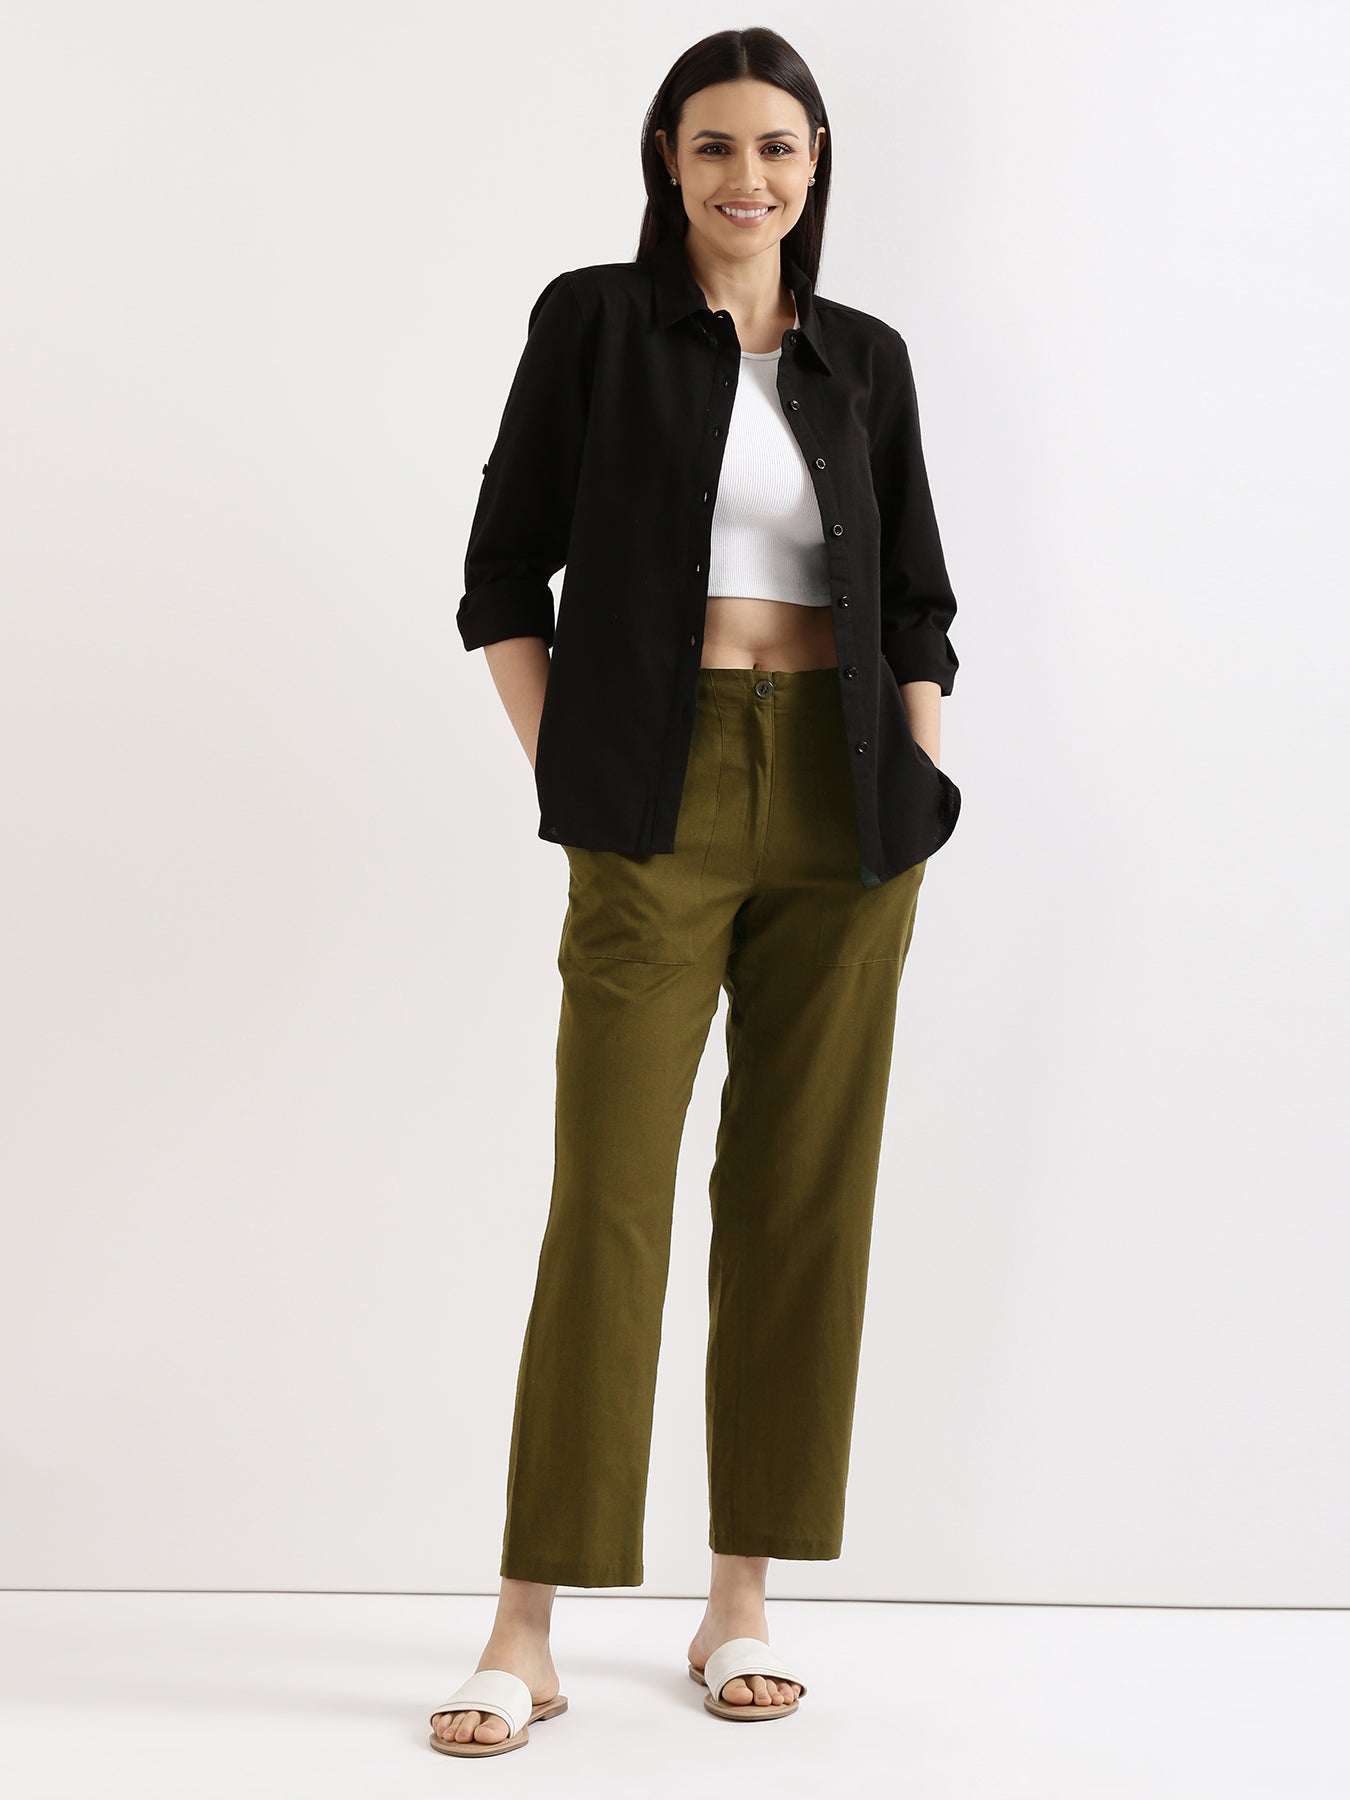 Olive Green Airy Linen Pants